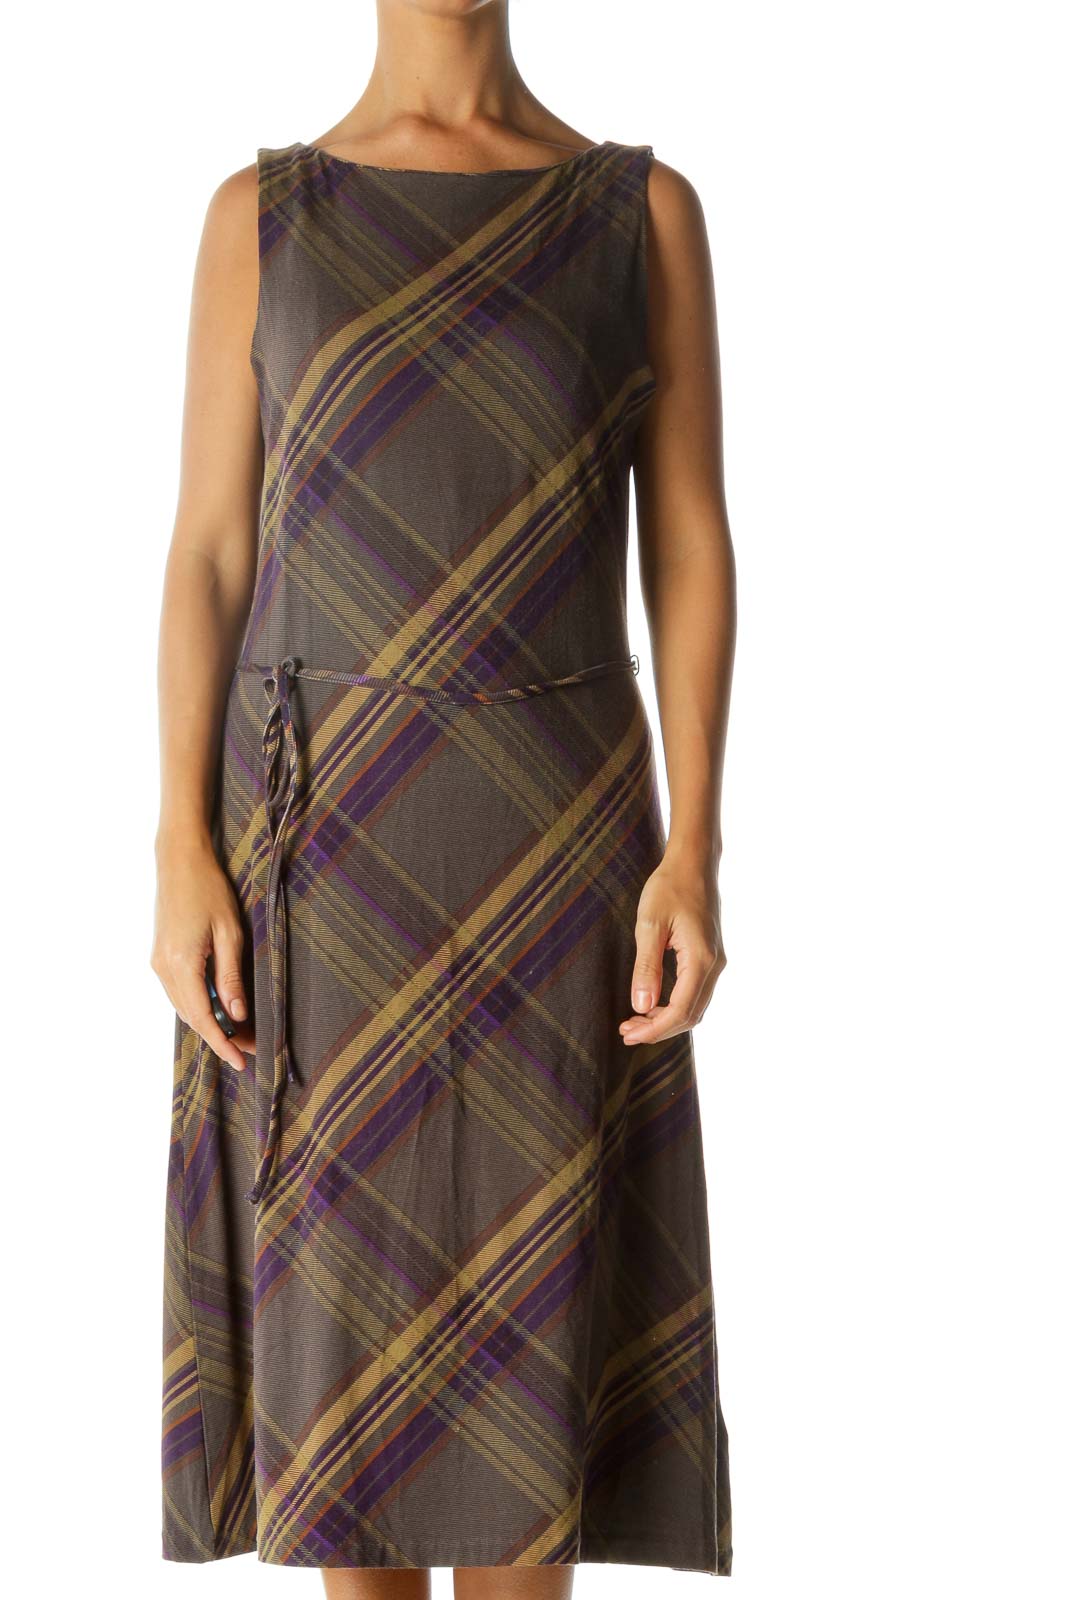 Gray Purple Yellow Orange Plaid Boat Neck Belted Stretch Dress Front